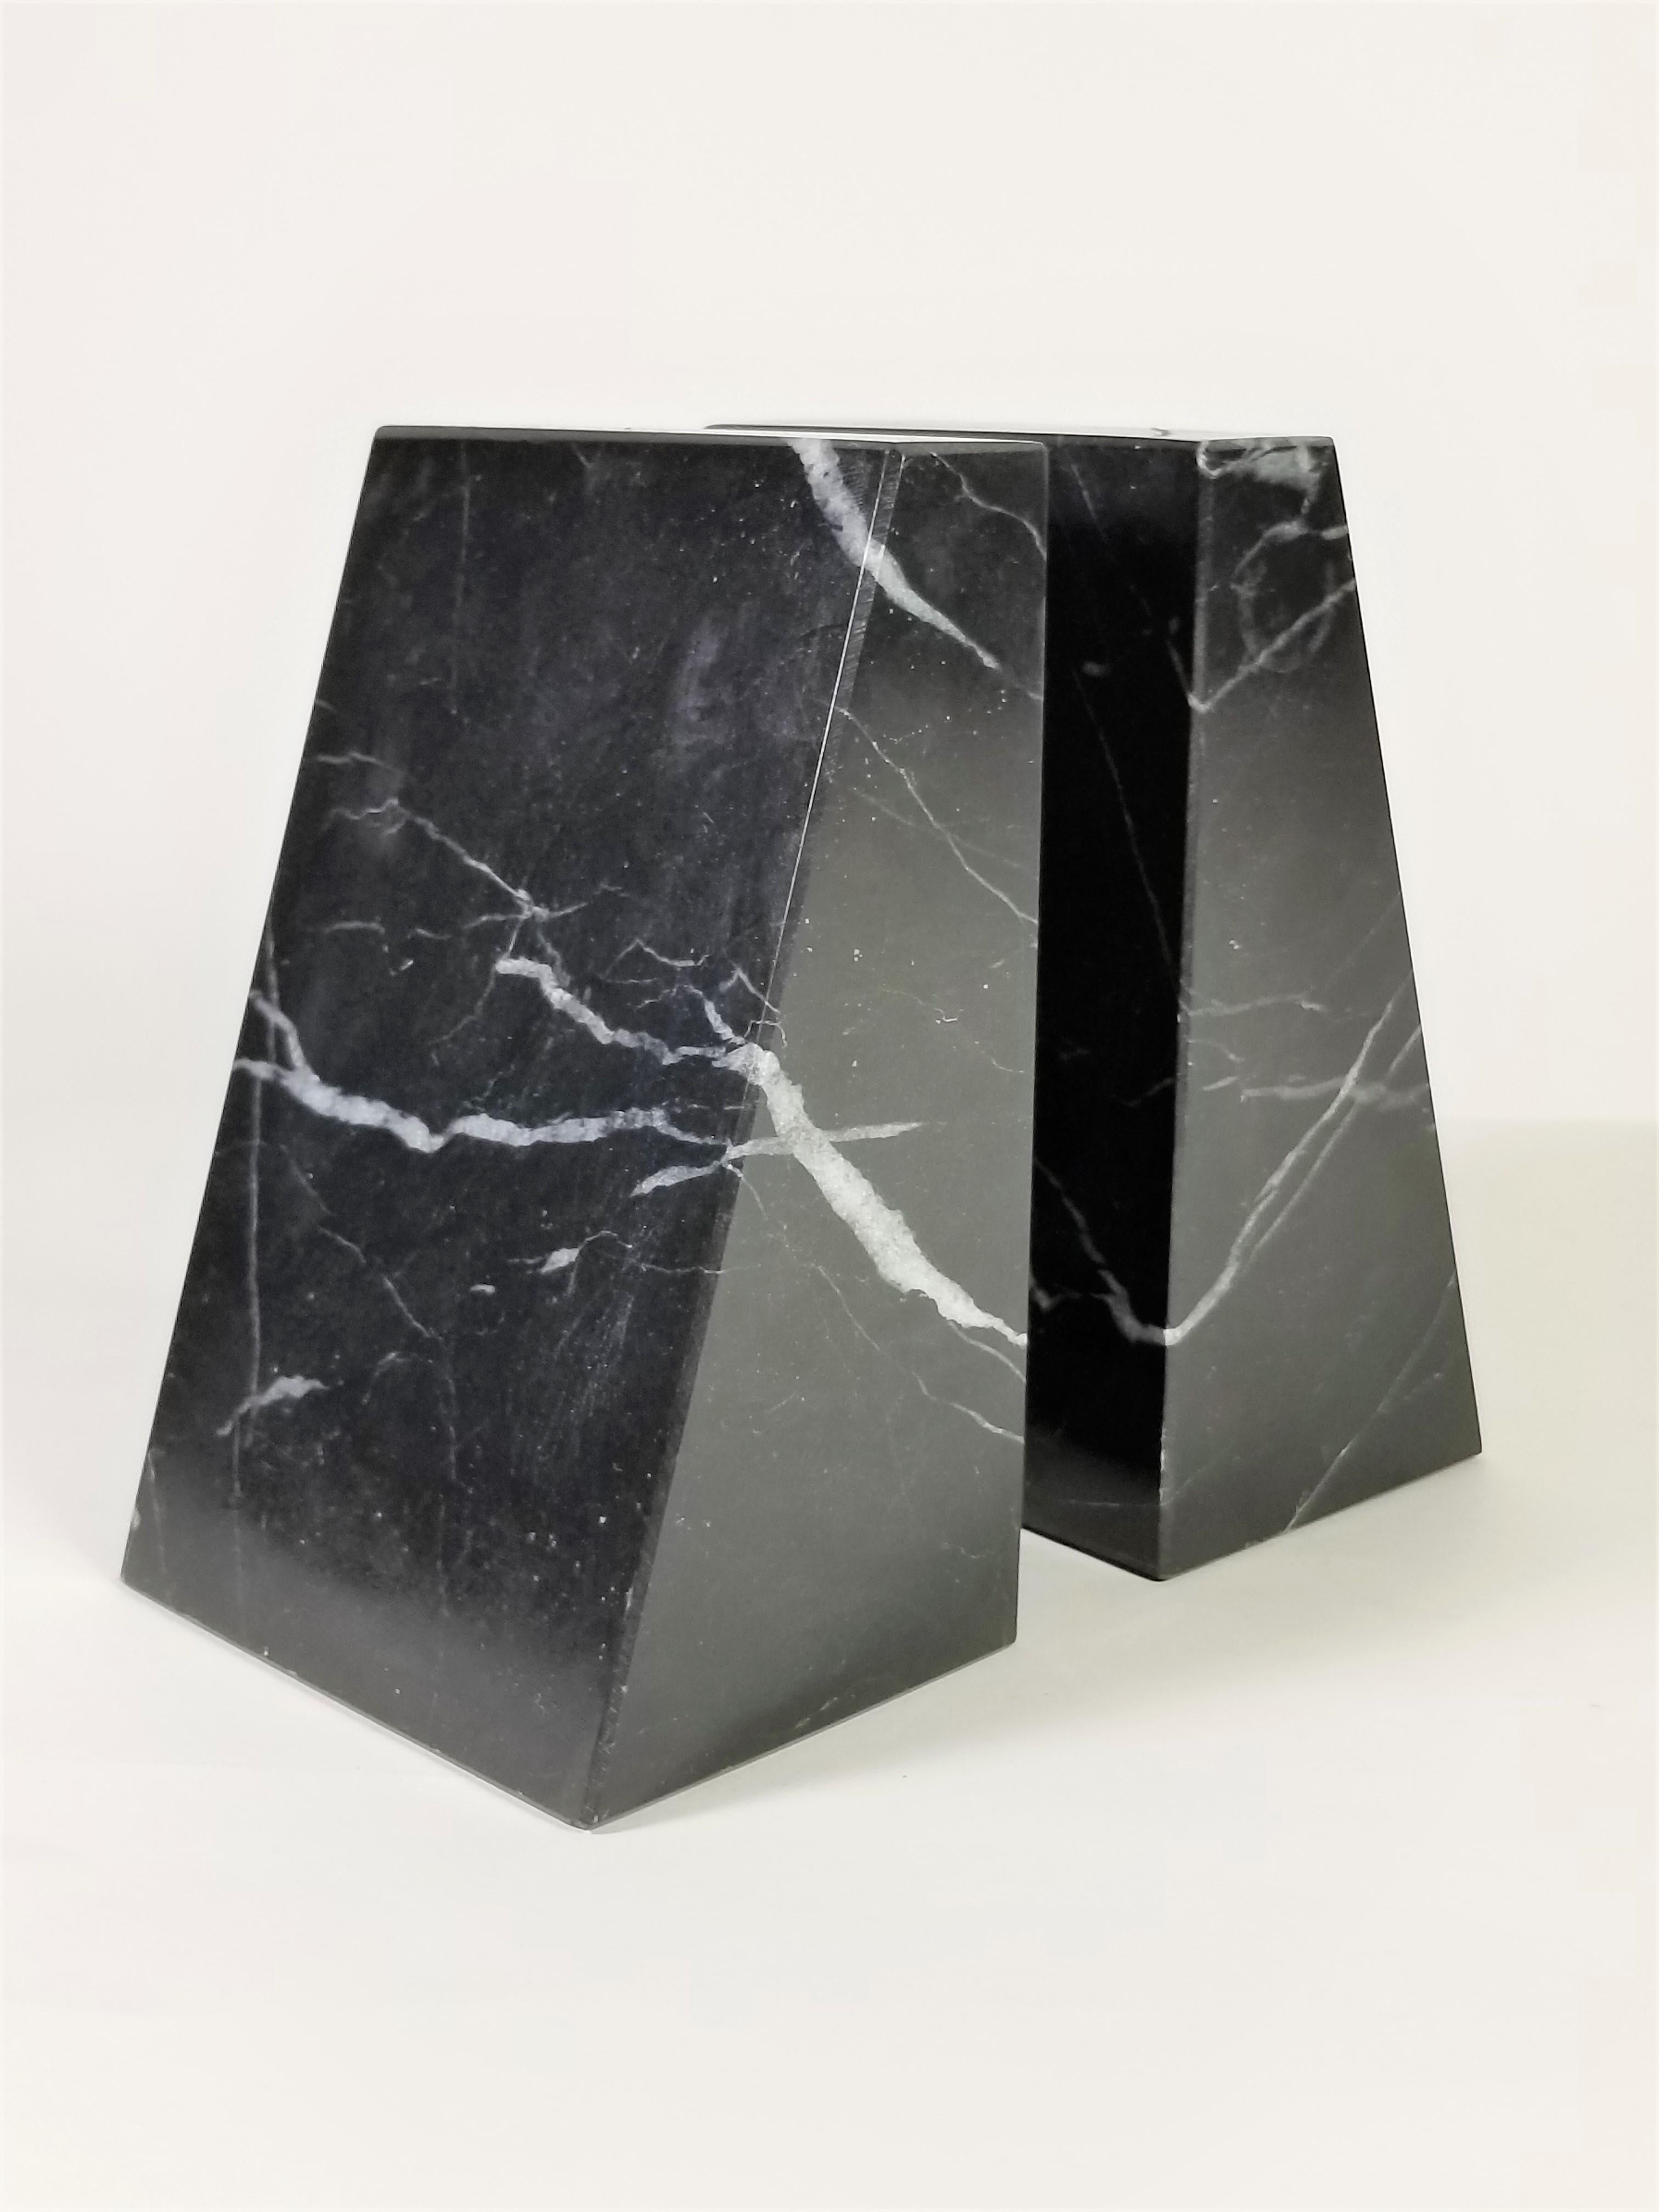 midcentury 1970s 1980s Pair of Marble Bookends. Black with white veining. Geometric design. Solid Marble.